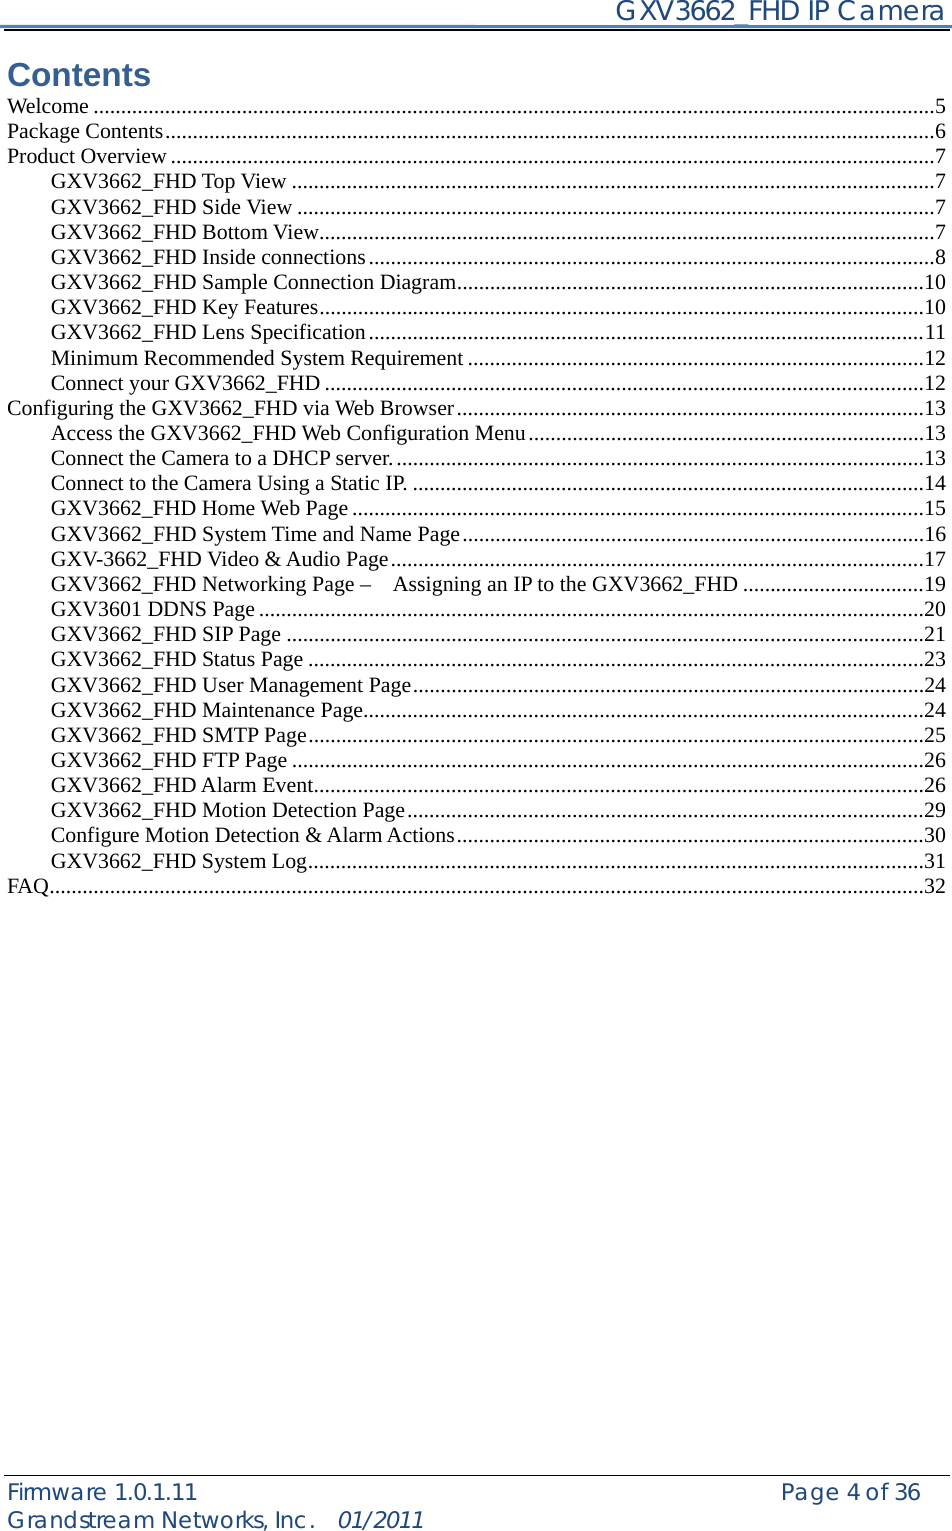     GXV3662_FHD IP Camera Firmware 1.0.1.11                                                   Page 4 of 36     Grandstream Networks, Inc.  01/2011  Contents Welcome .........................................................................................................................................................5Package Contents............................................................................................................................................6Product Overview...........................................................................................................................................7GXV3662_FHD Top View .....................................................................................................................7GXV3662_FHD Side View ....................................................................................................................7GXV3662_FHD Bottom View................................................................................................................7GXV3662_FHD Inside connections.......................................................................................................8GXV3662_FHD Sample Connection Diagram.....................................................................................10GXV3662_FHD Key Features..............................................................................................................10GXV3662_FHD Lens Specification.....................................................................................................11Minimum Recommended System Requirement ...................................................................................12Connect your GXV3662_FHD .............................................................................................................12Configuring the GXV3662_FHD via Web Browser.....................................................................................13Access the GXV3662_FHD Web Configuration Menu........................................................................13Connect the Camera to a DHCP server.................................................................................................13Connect to the Camera Using a Static IP. .............................................................................................14GXV3662_FHD Home Web Page ........................................................................................................15GXV3662_FHD System Time and Name Page....................................................................................16GXV-3662_FHD Video &amp; Audio Page.................................................................................................17GXV3662_FHD Networking Page –    Assigning an IP to the GXV3662_FHD .................................19GXV3601 DDNS Page.........................................................................................................................20GXV3662_FHD SIP Page ....................................................................................................................21GXV3662_FHD Status Page ................................................................................................................23GXV3662_FHD User Management Page.............................................................................................24GXV3662_FHD Maintenance Page......................................................................................................24GXV3662_FHD SMTP Page................................................................................................................25GXV3662_FHD FTP Page ...................................................................................................................26GXV3662_FHD Alarm Event...............................................................................................................26GXV3662_FHD Motion Detection Page..............................................................................................29Configure Motion Detection &amp; Alarm Actions.....................................................................................30GXV3662_FHD System Log................................................................................................................31FAQ...............................................................................................................................................................32          